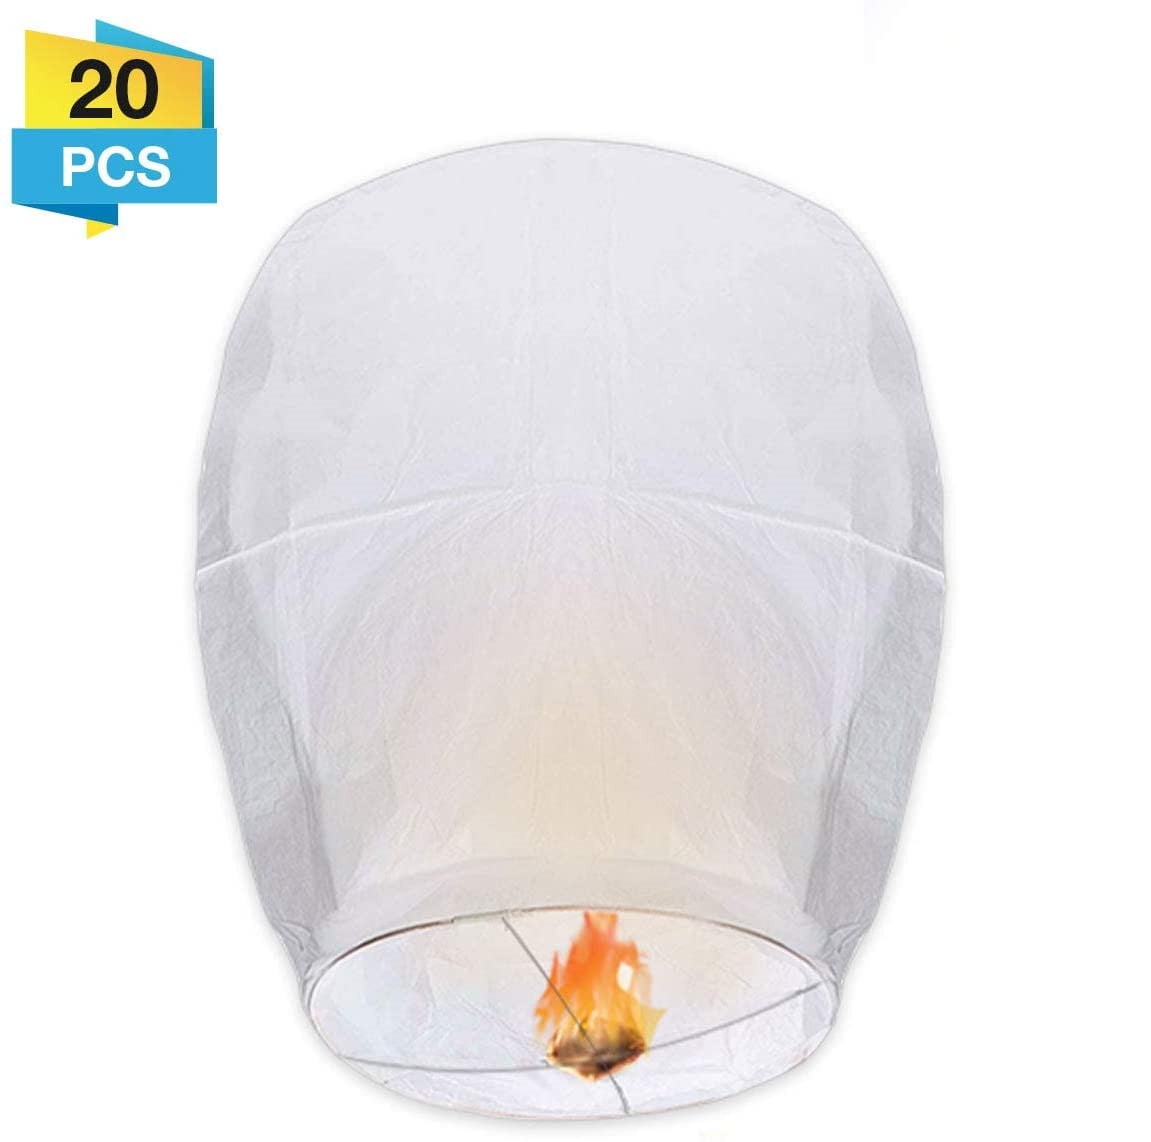 Sky Lanterns （10 Pack Chinese Wishing Lanterns 100% ECO Friendly Biodegradable Paper with Fire Resistant Paper for Weddings Birthdays Memorials and Celebration Events 5